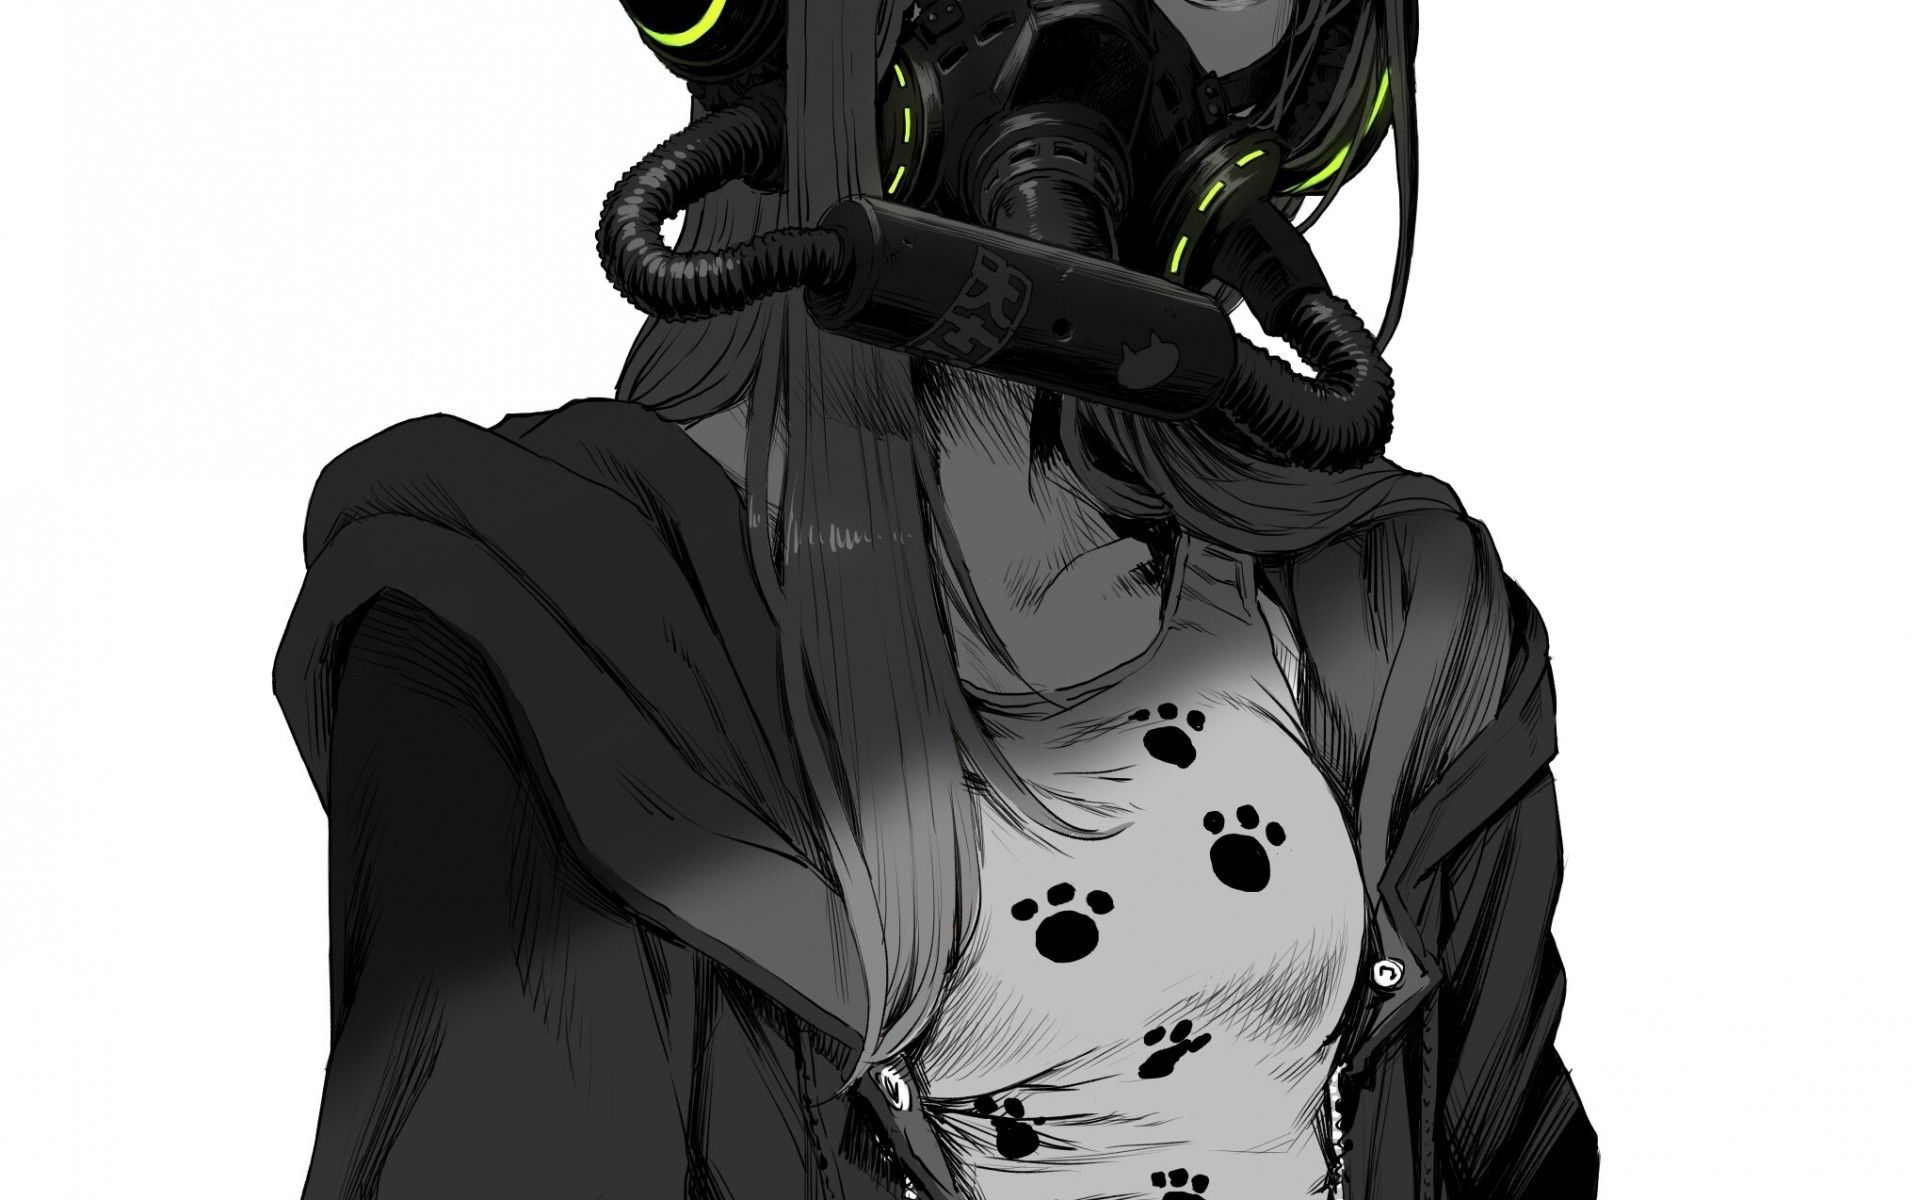 Download 1920x1200 Anime Girl, Mask, Jacket, Black And White.